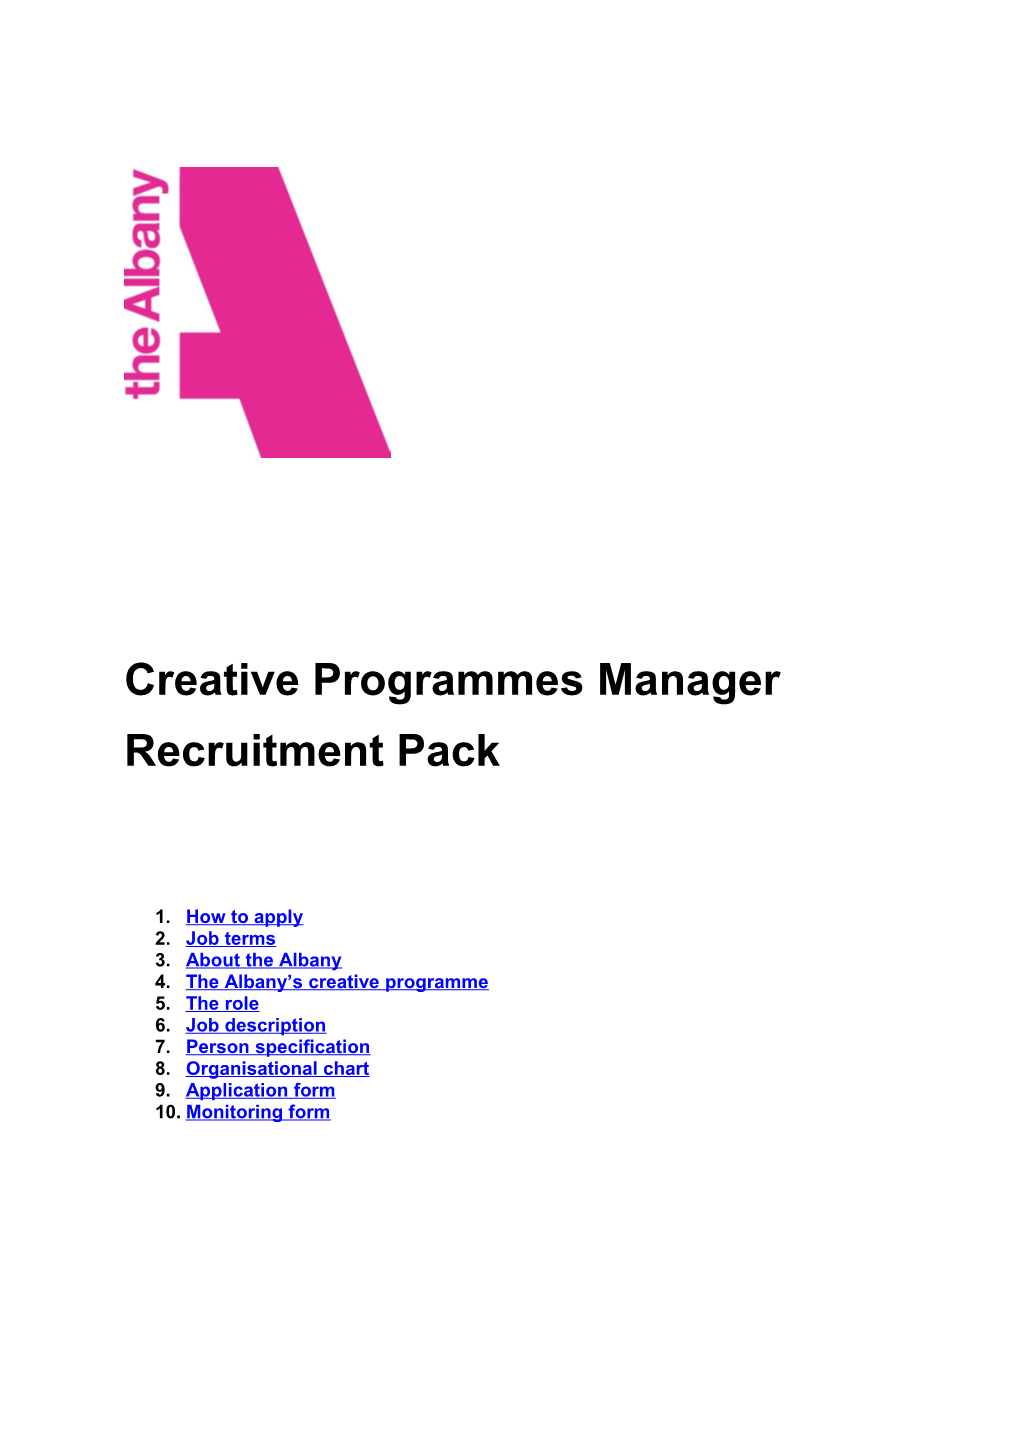 Creative Programmes Manager